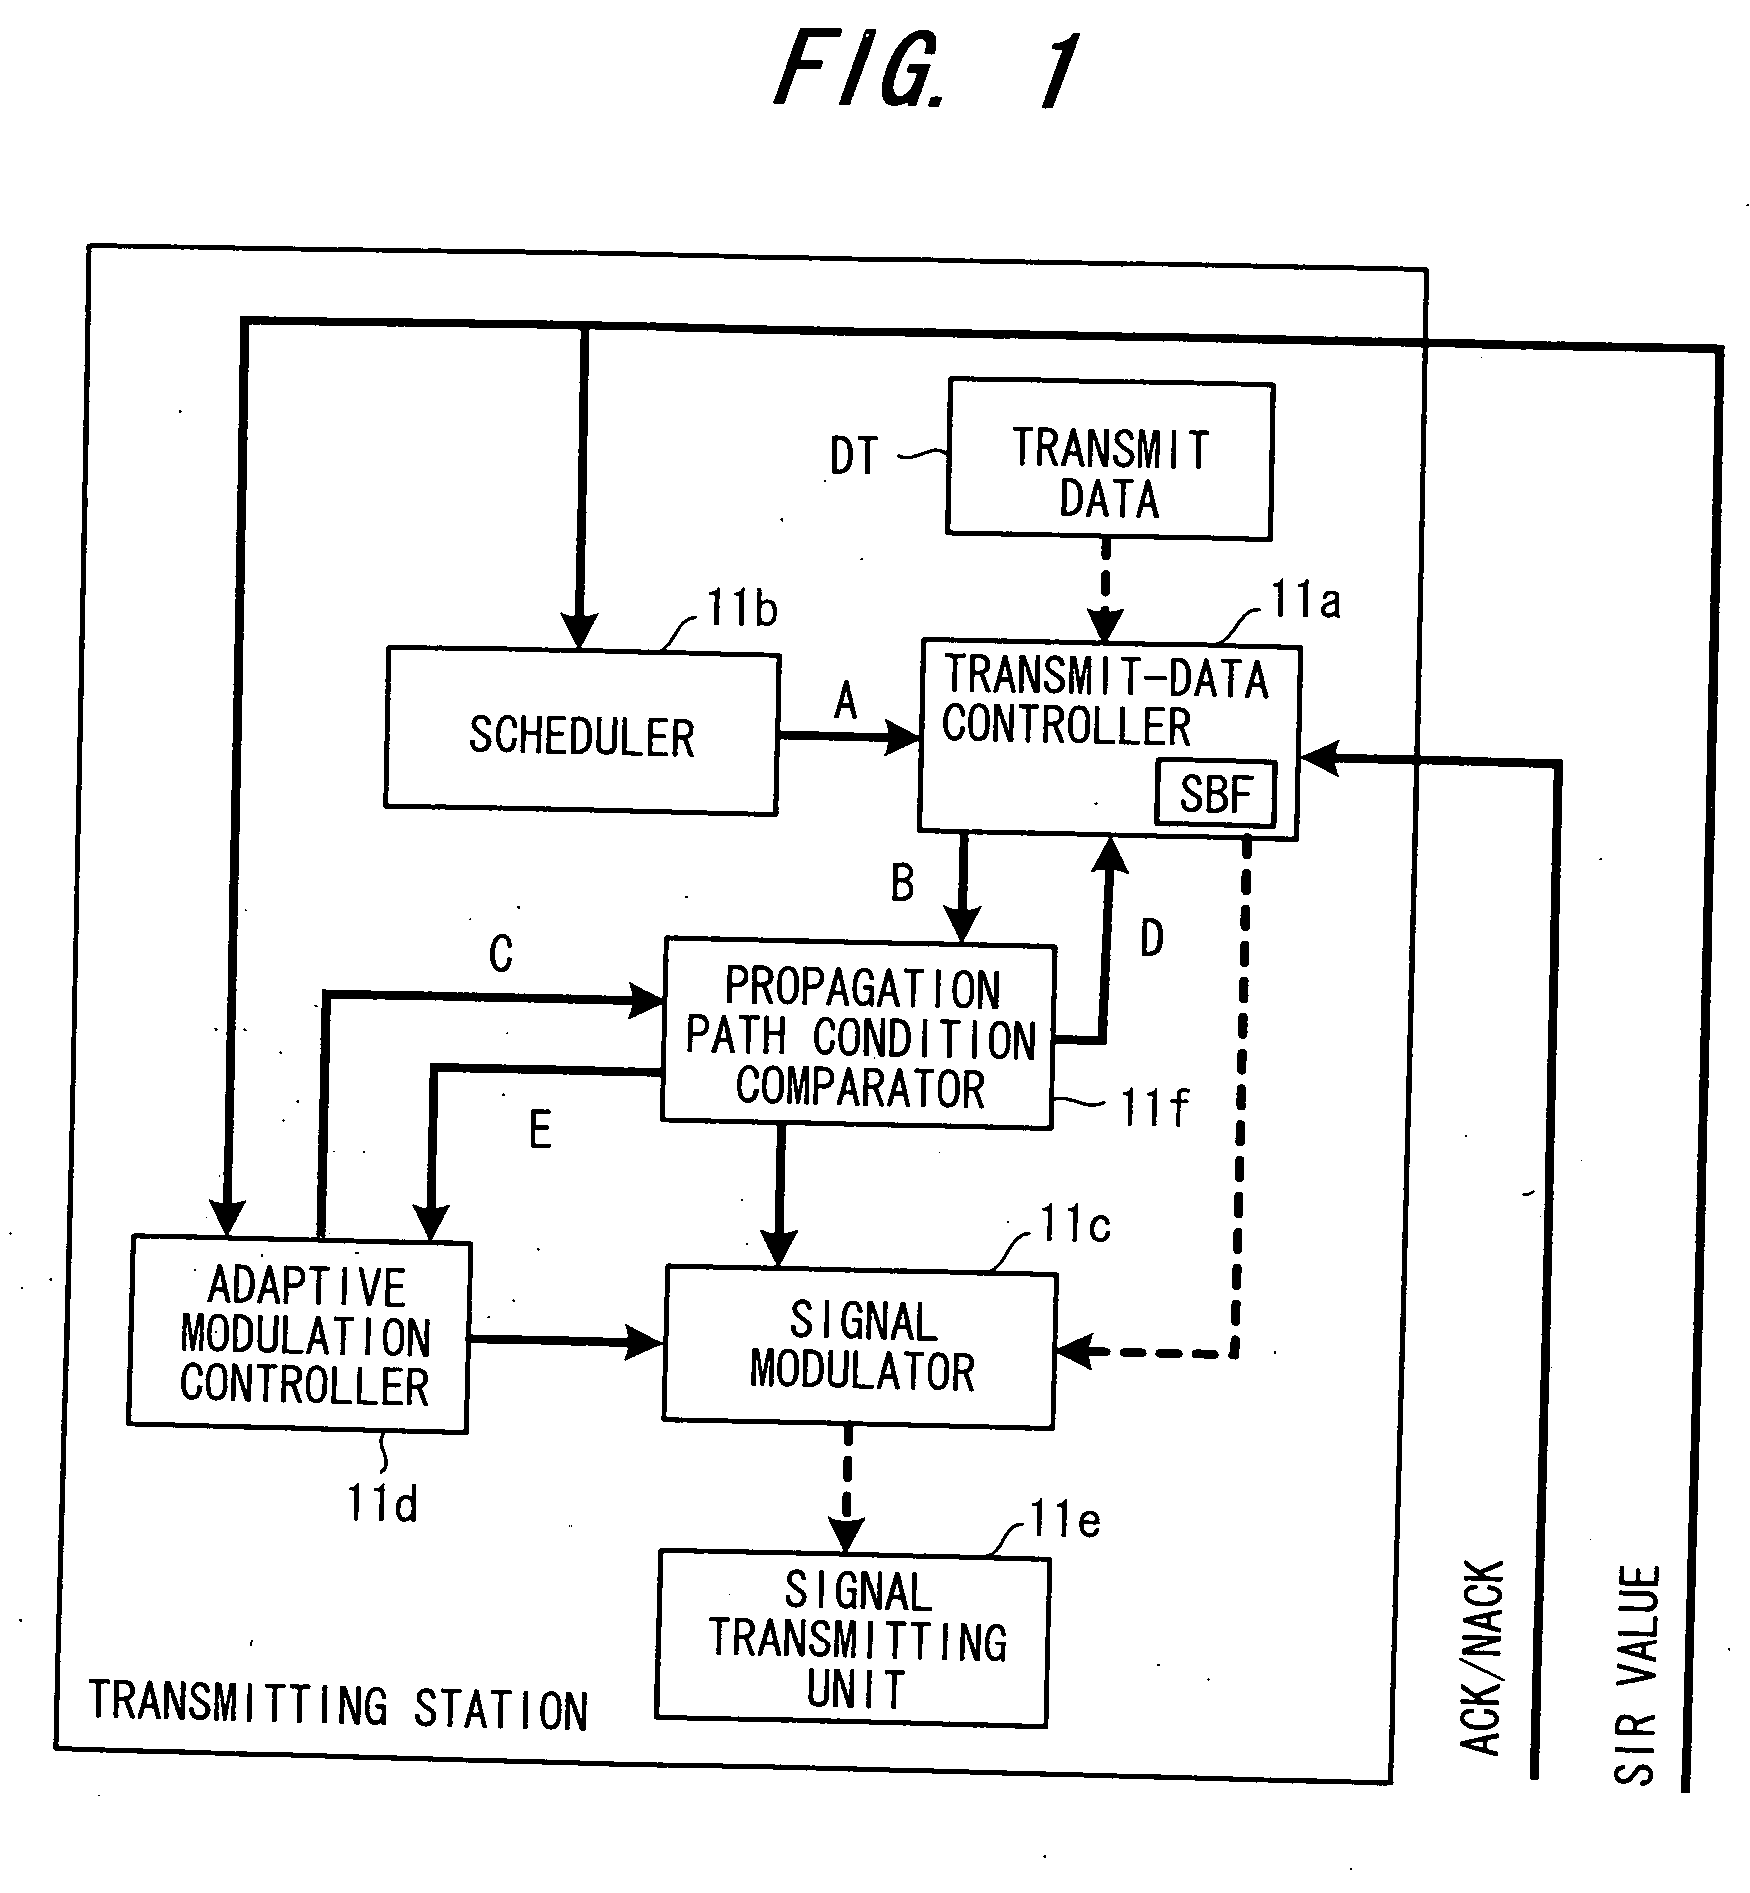 Packet transceiver apparatus